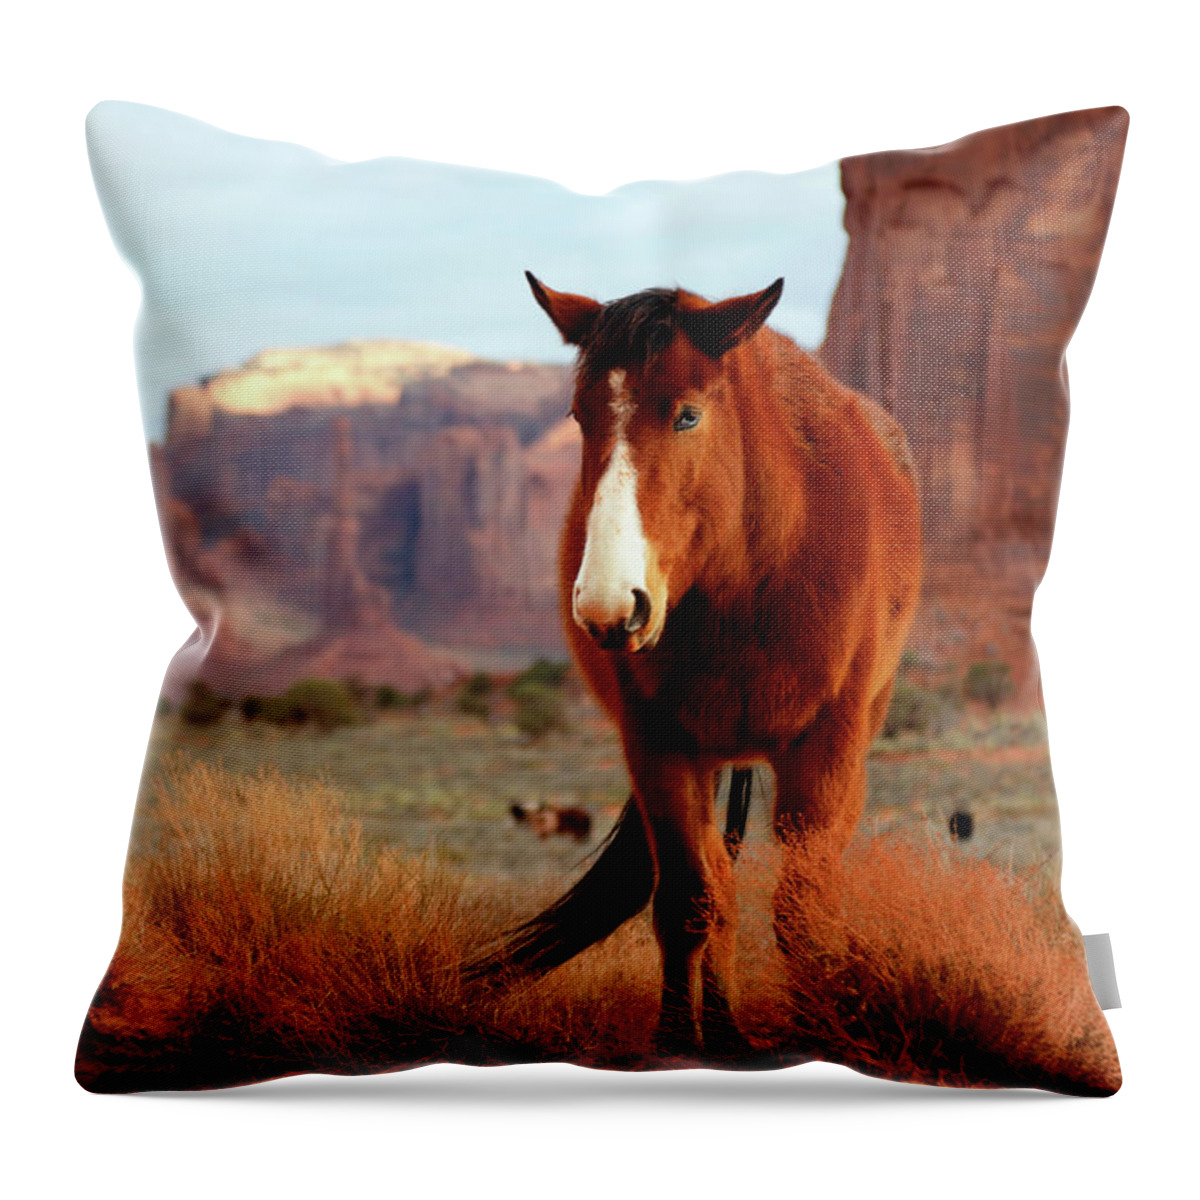 Mustang Throw Pillow featuring the photograph Mustang by Nicholas Blackwell